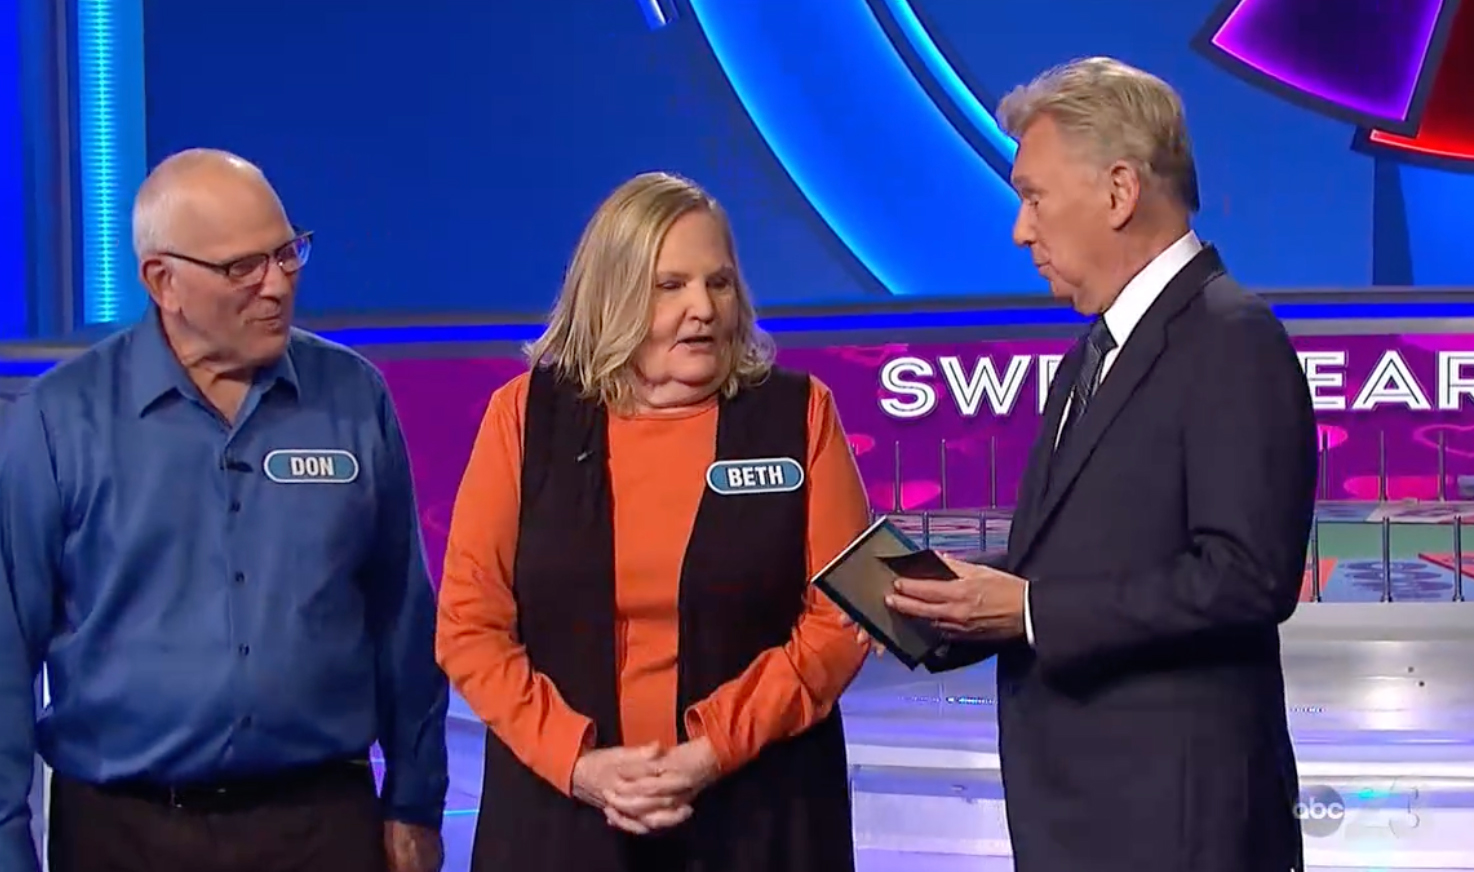 Pat Sajak swept in with a cruel wordplay joke: 'You missed the point there, as it turned out'